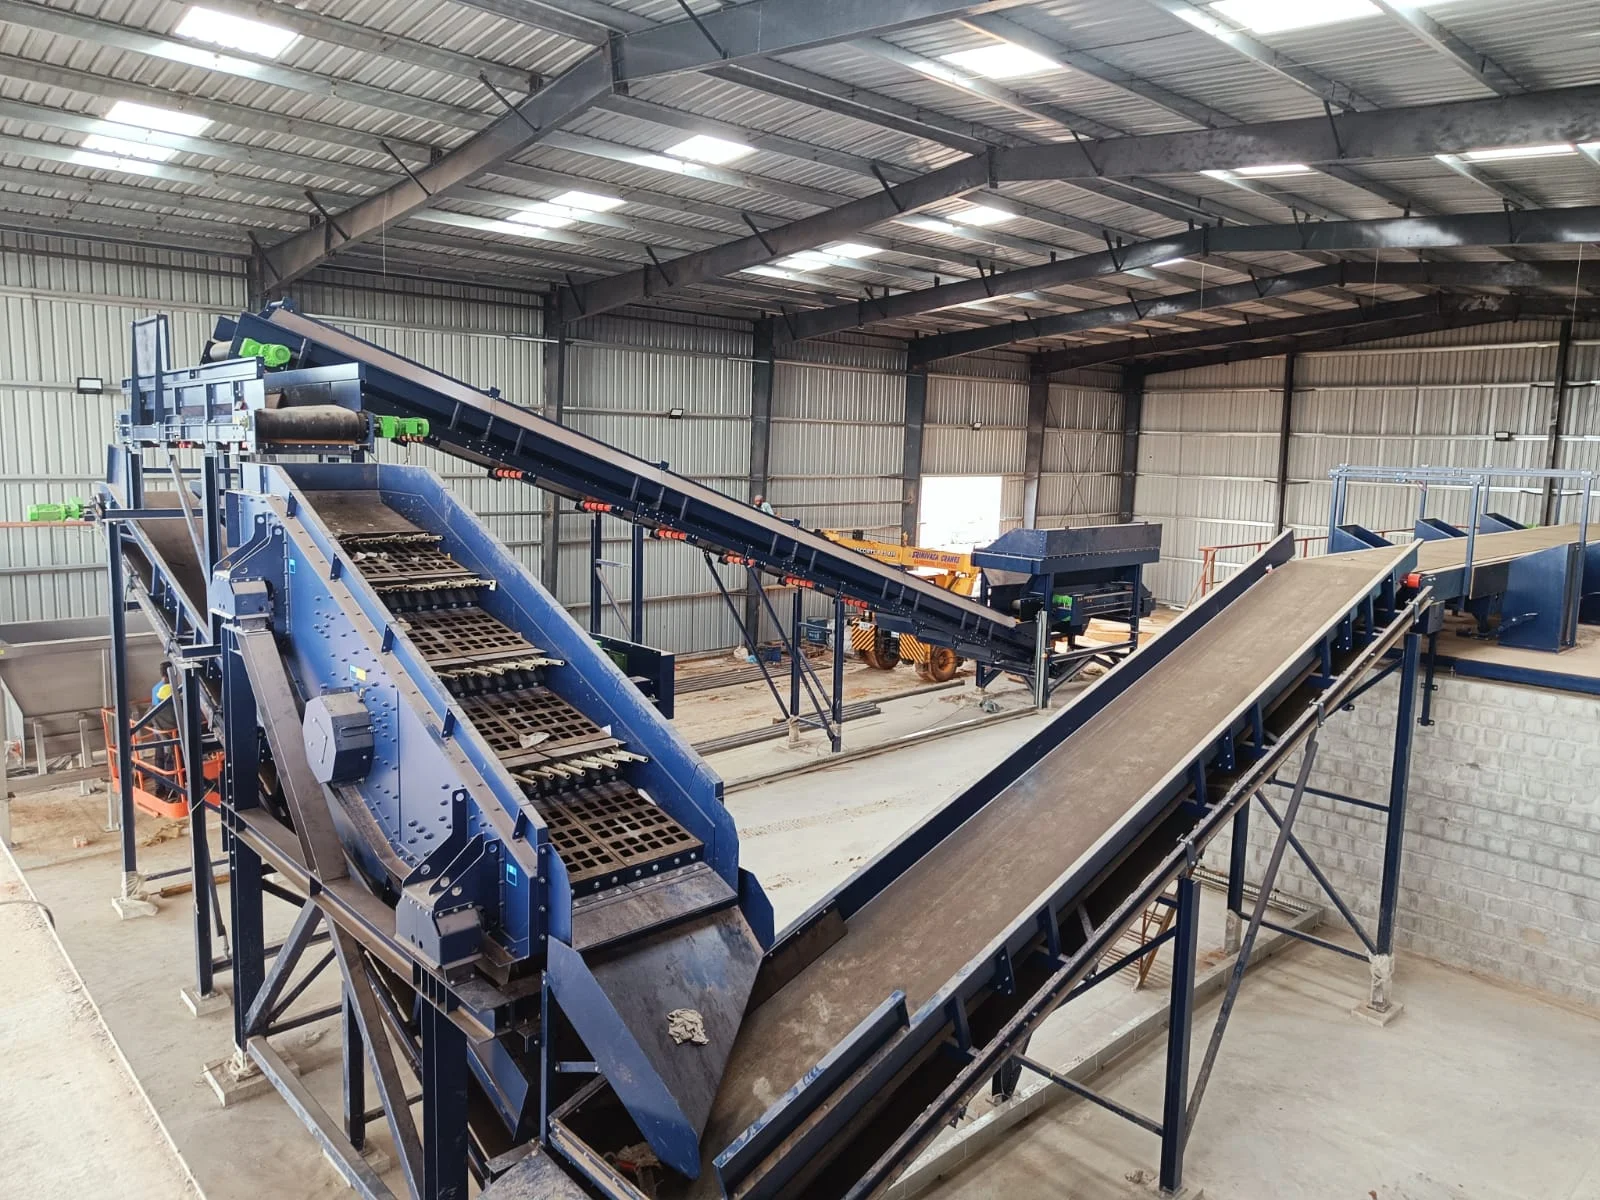 "Introducing the Cascade Screen, where waste is separated by size, allowing for efficient downstream sorting and processing."